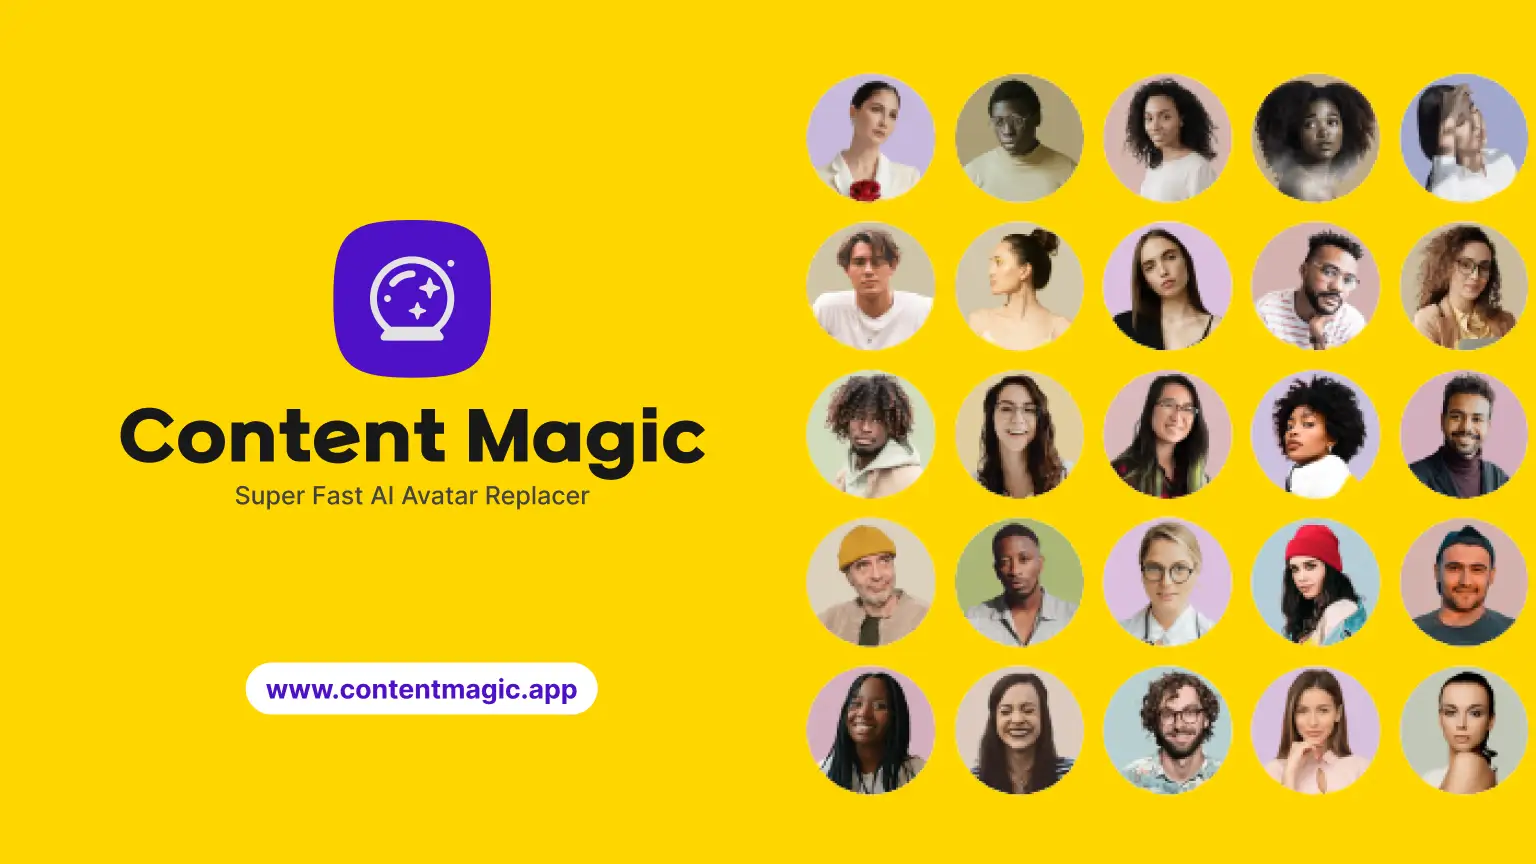 From Beginner to Pro: How Aswin Leveled Up with Content Magic